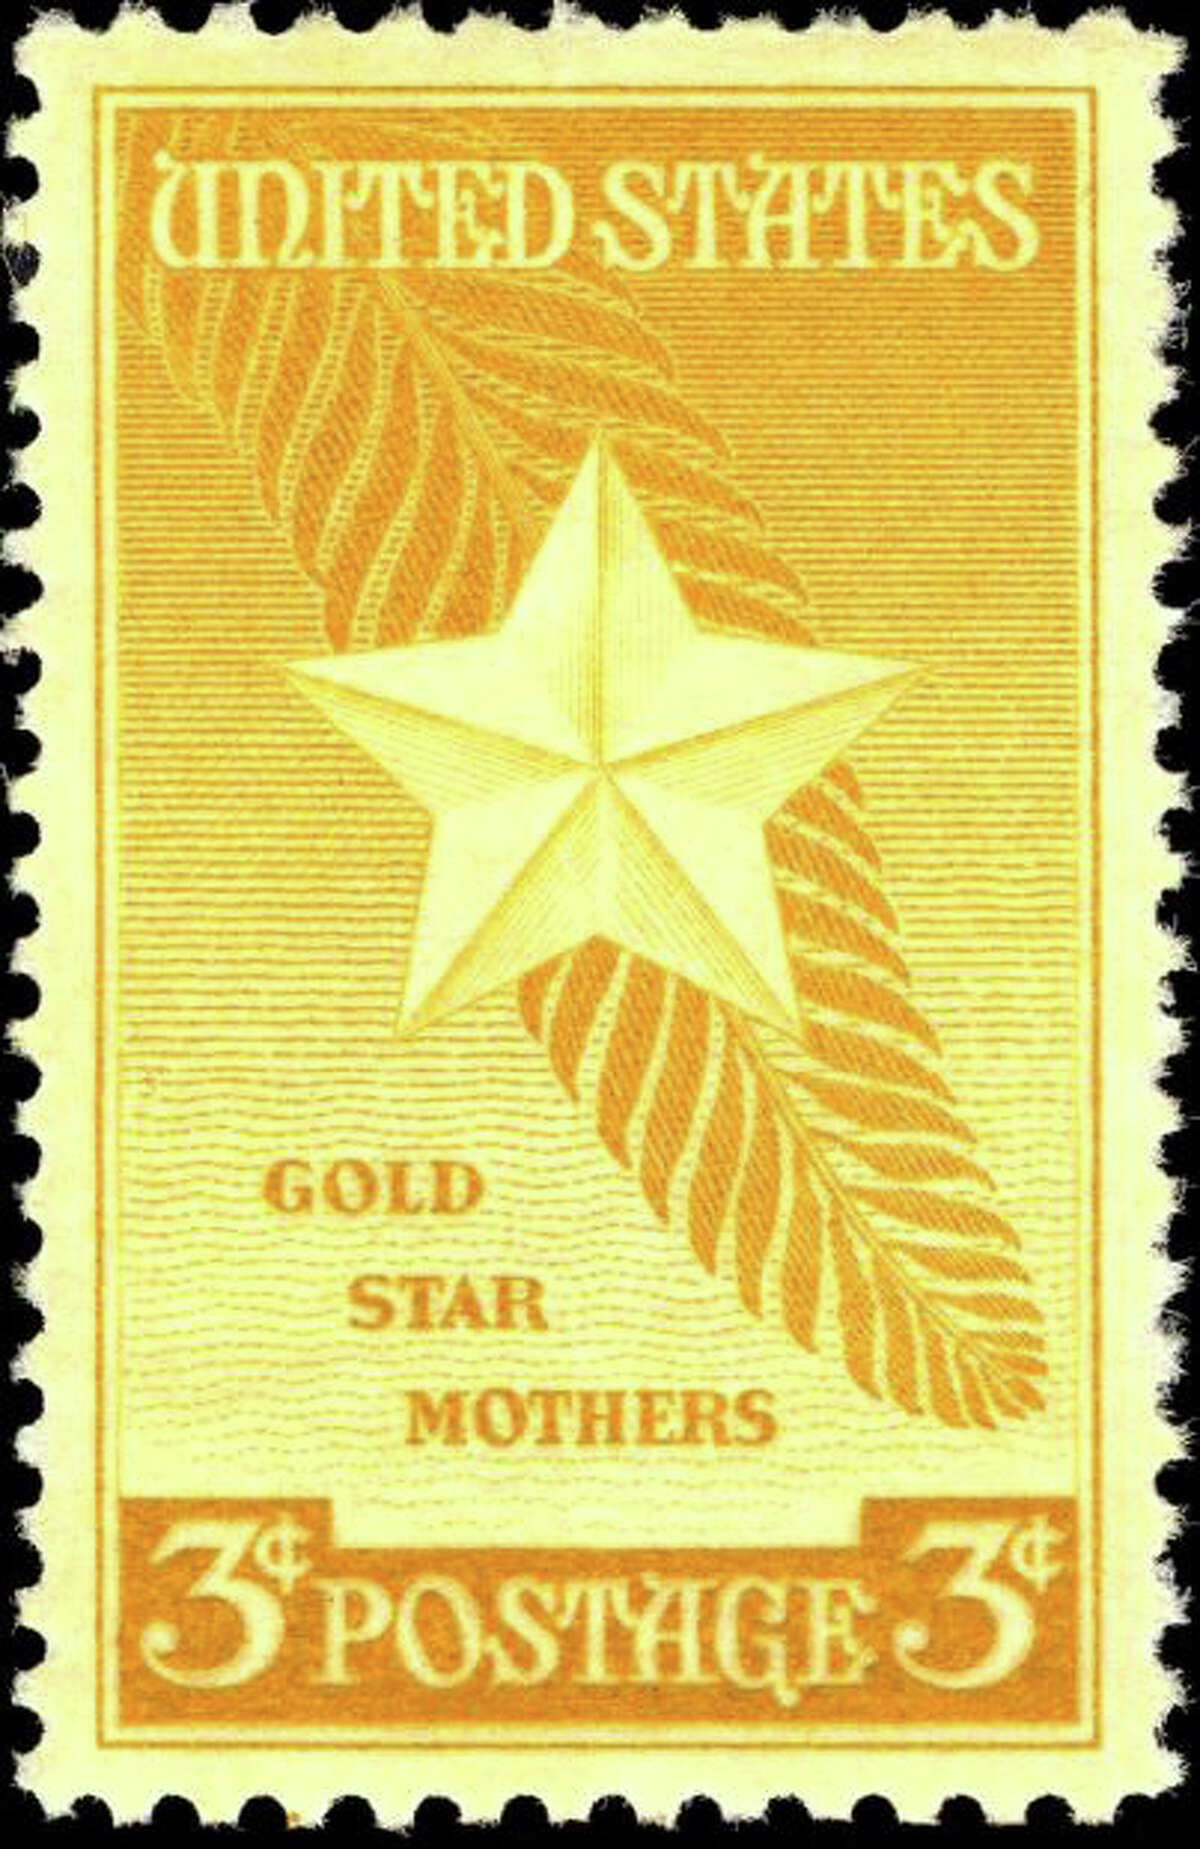 Greenwich resident Joe Kaliko and U.S. Sen. Richard Blumenthal are working to have the Postal Service issue a stamp to honor Gold Star families, similar to the Gold Star Mothers stamp that was issued in 1948.